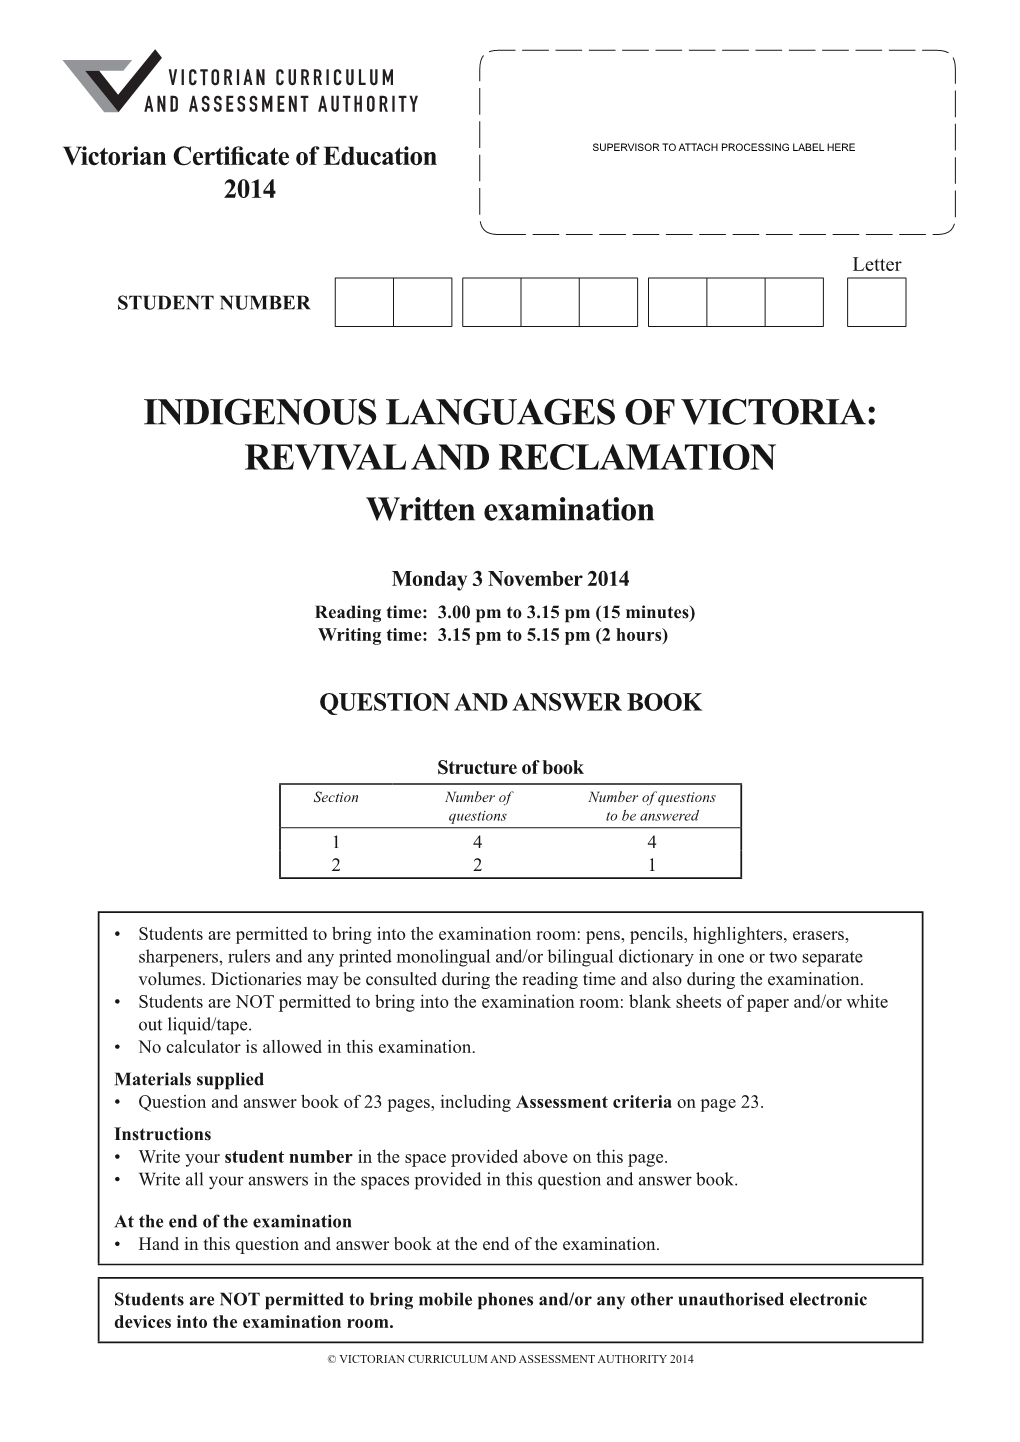 2014 Indigenous Languages of Victoria Revival and Reclamation